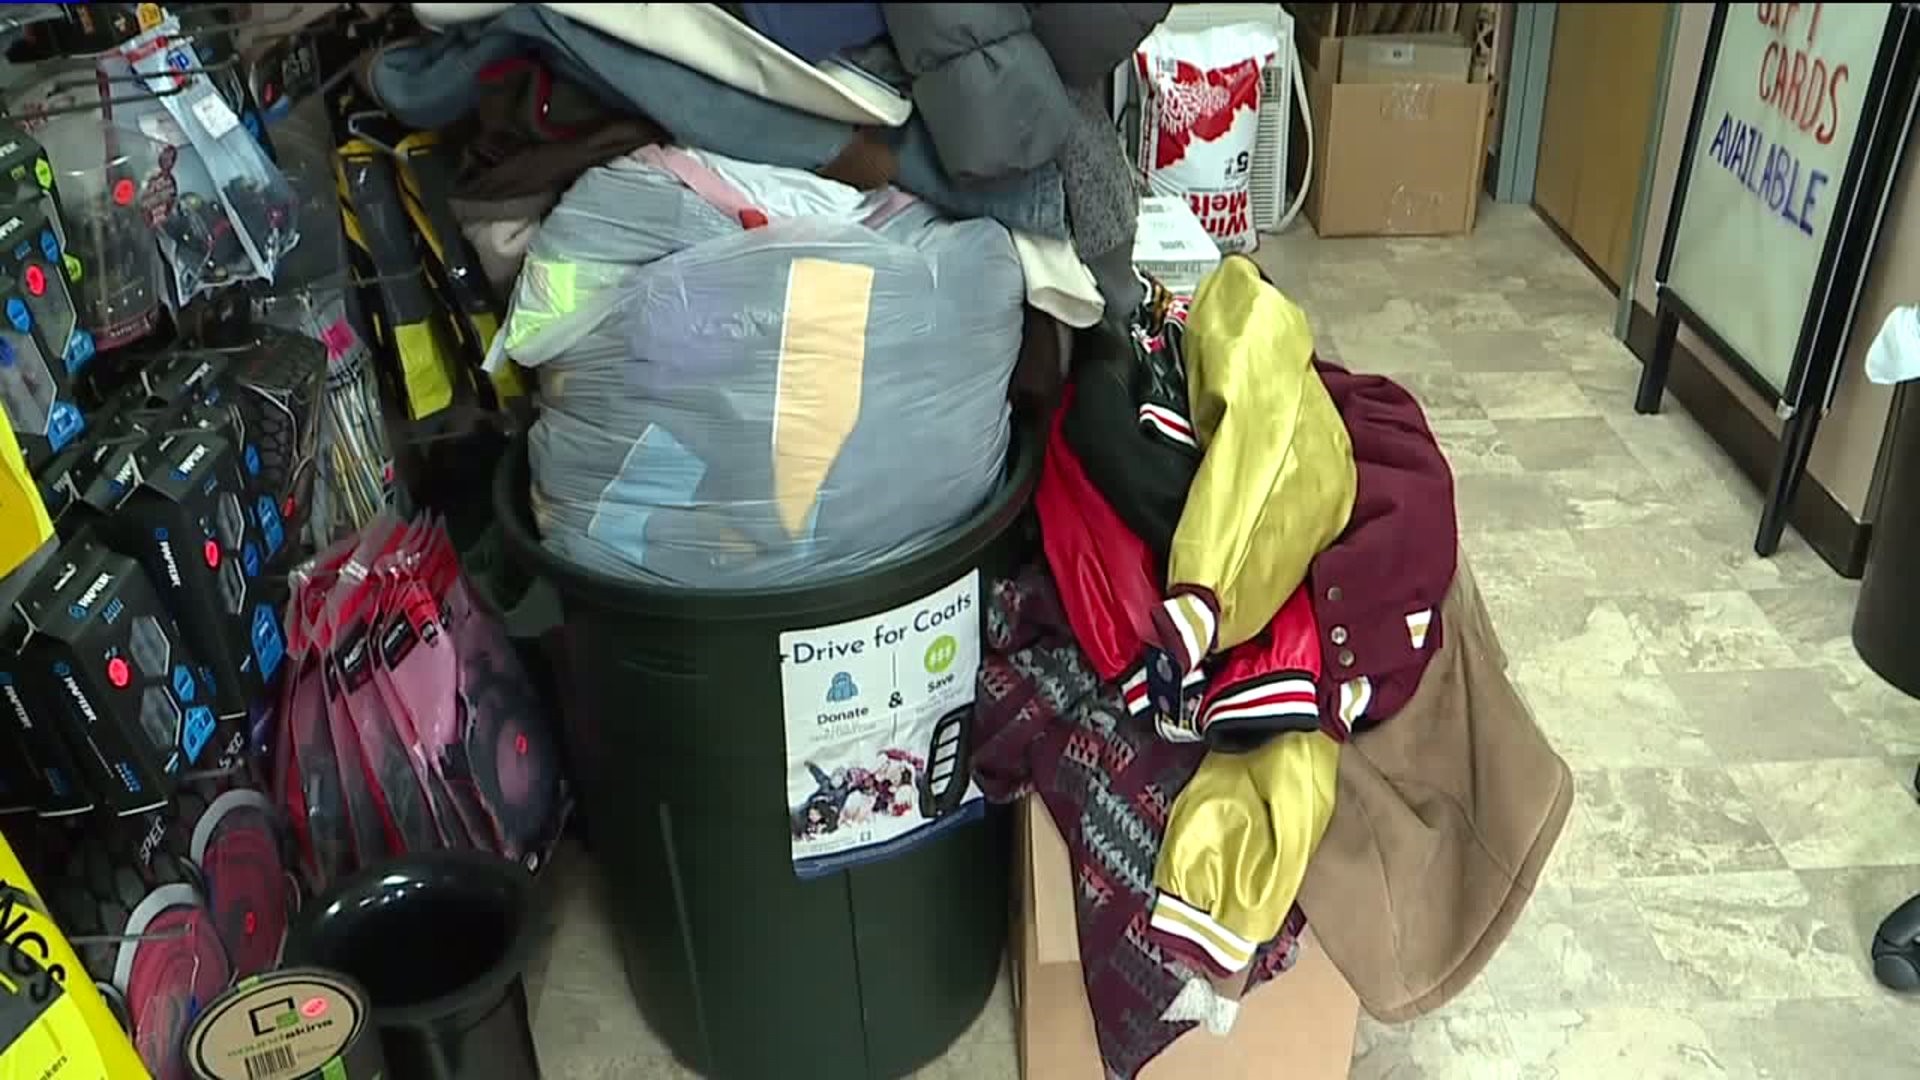 Pottsville Business Collecting Coats to Keep Folks Warm